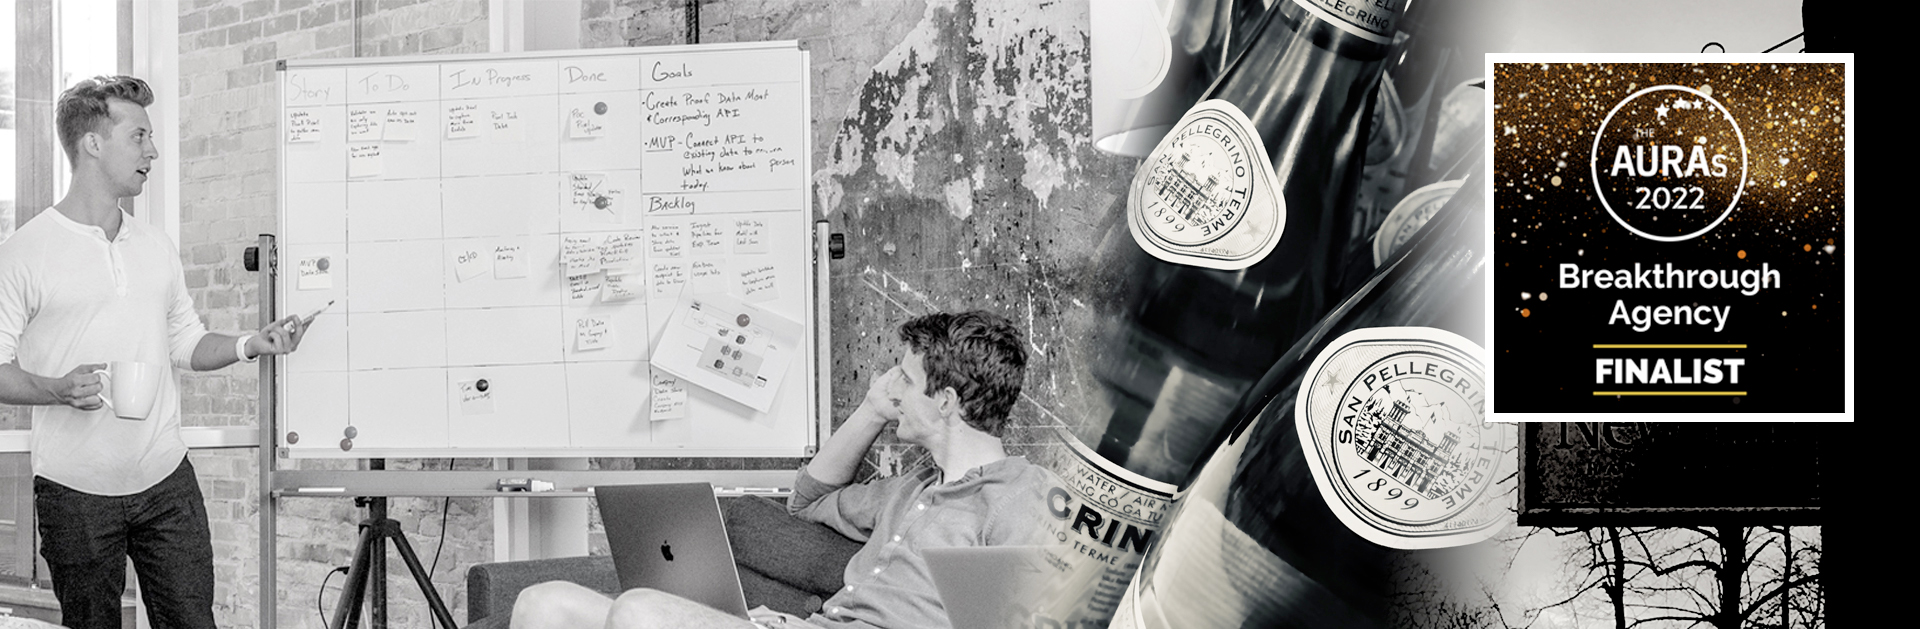 Photo montage image of mineral water, men talking next to white board and pub sign